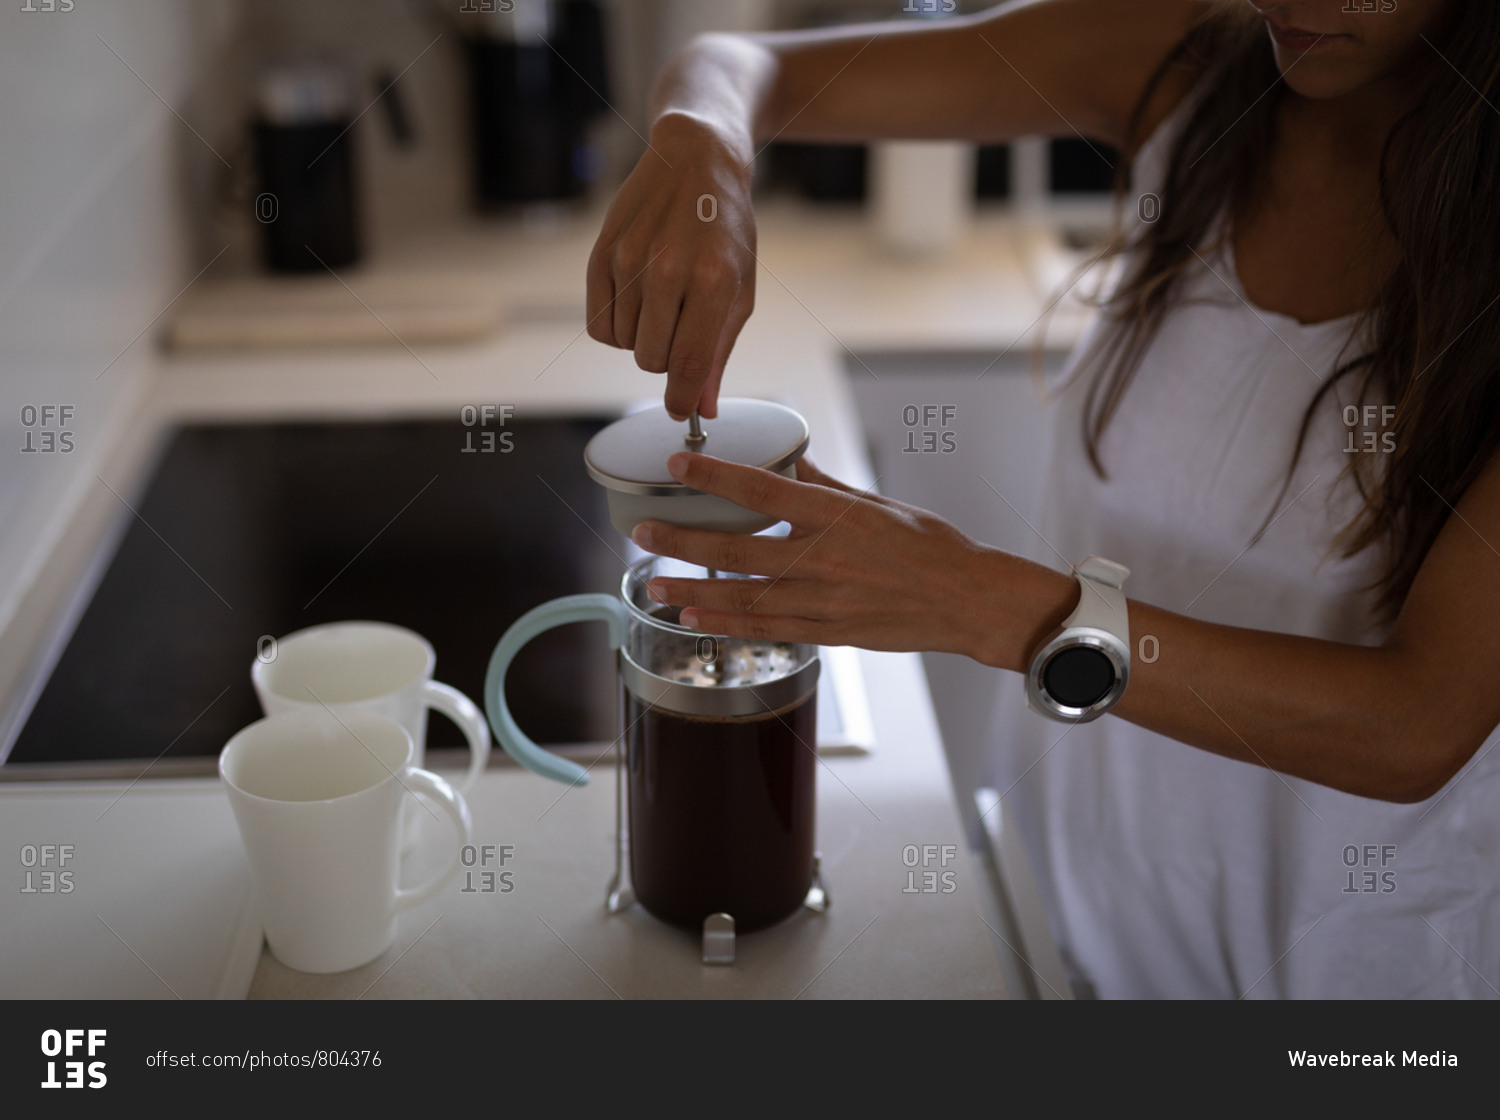 Mid section of mixed-race woman making coffee in coffee maker standing in the kitchen